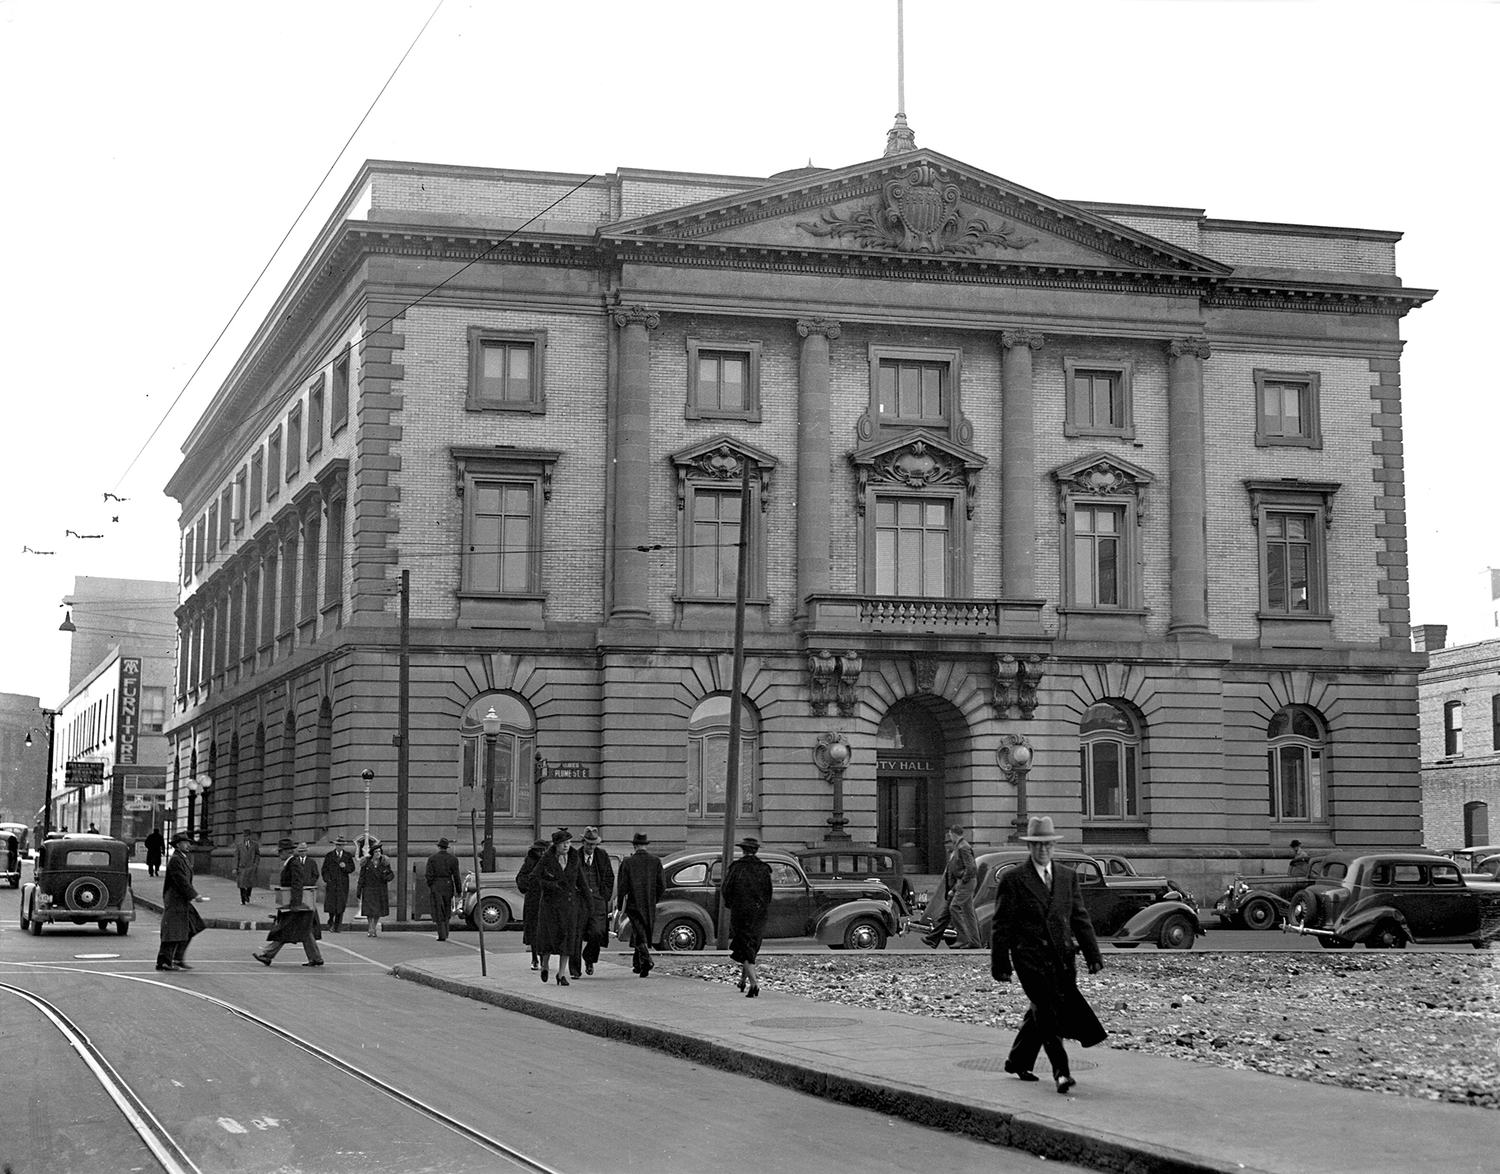 Slover Library building at the City Hall in 1938